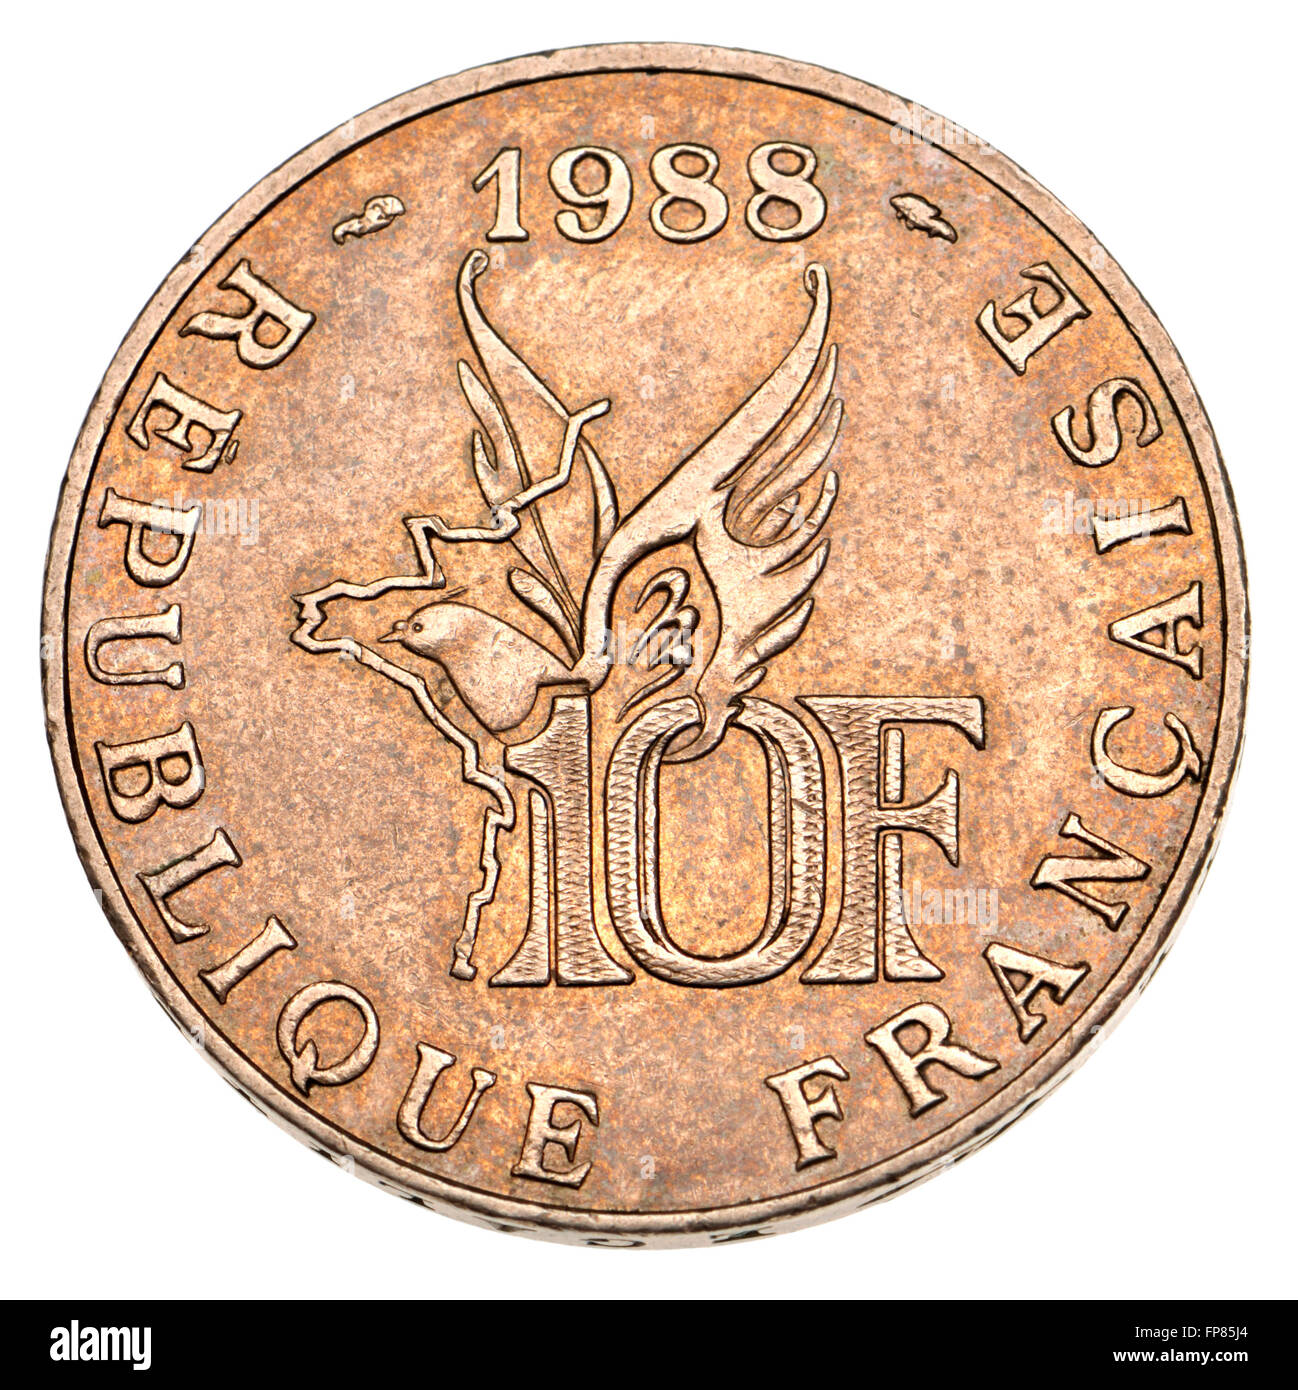 French 10f coin, 1988, commemorating 100th anniversary of the birth of Roland Garros, French aviator - reverse Stock Photo